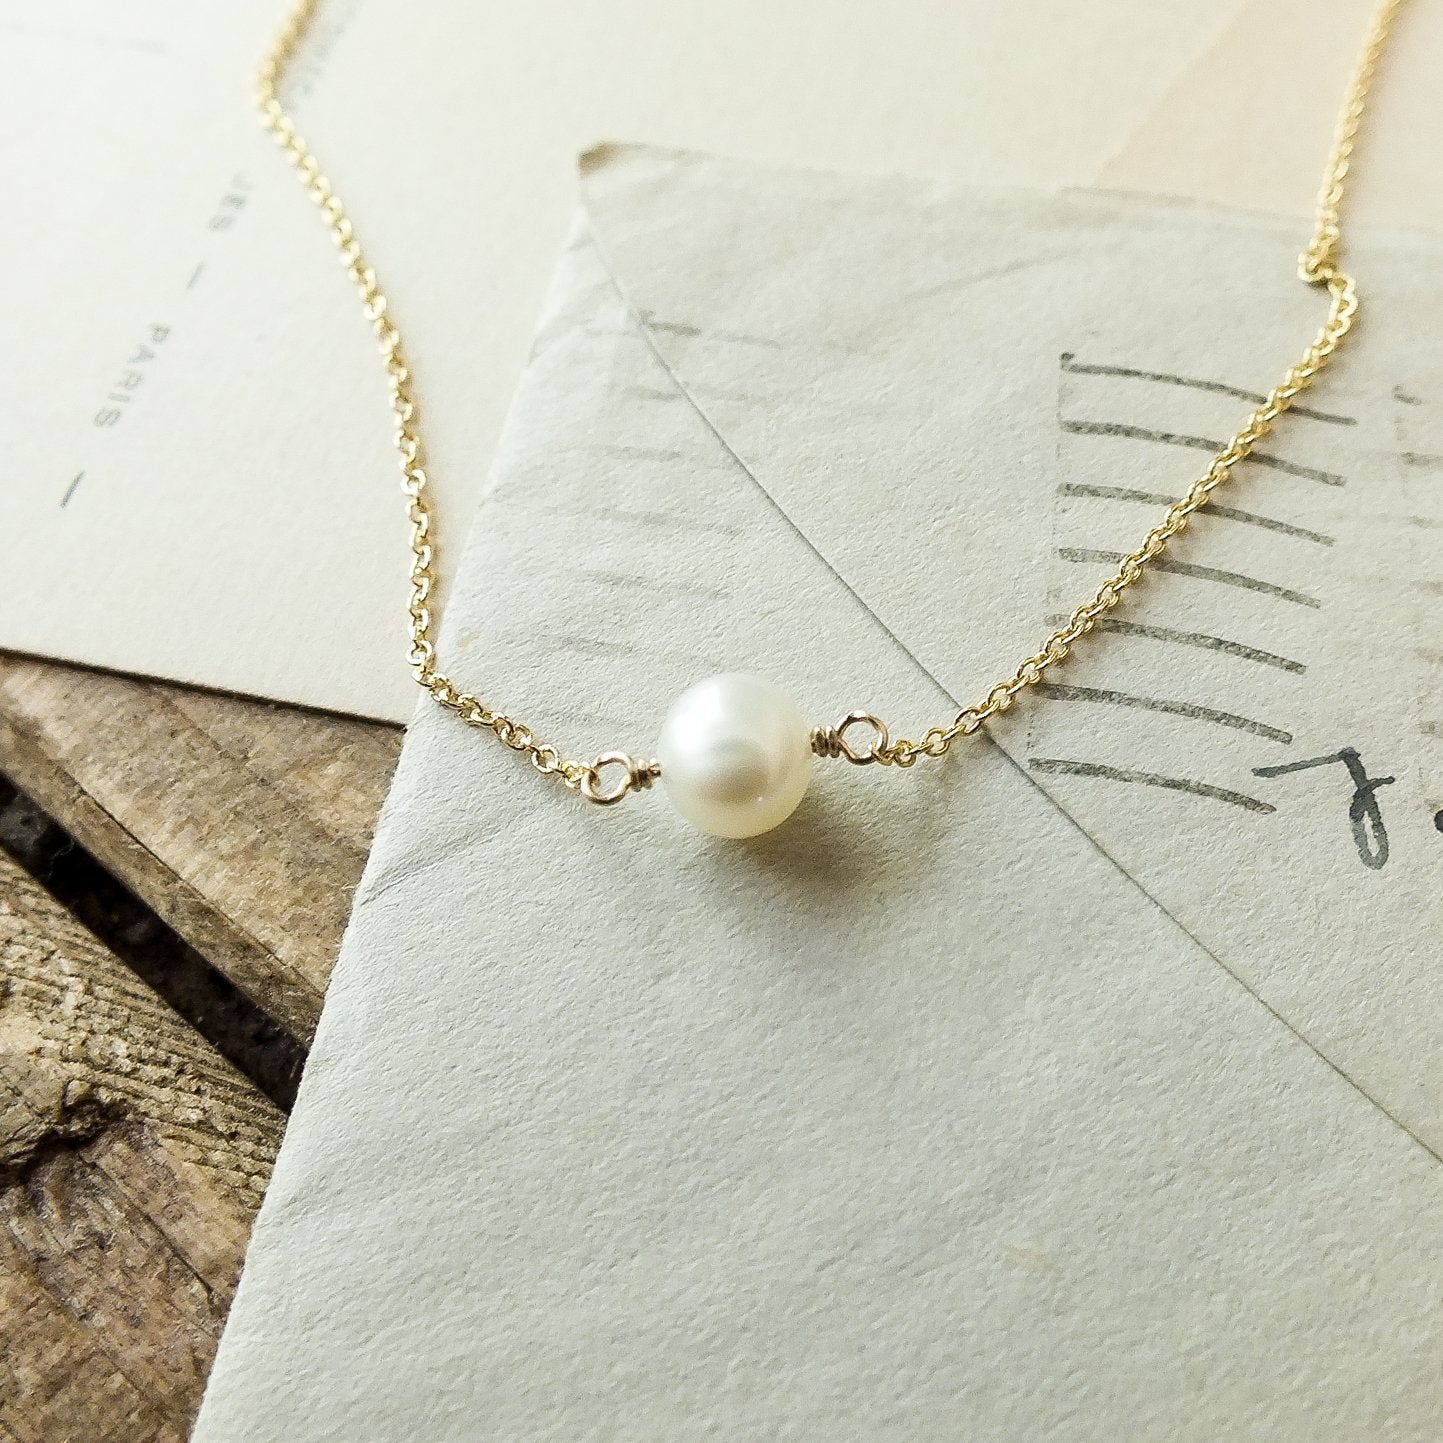 Simple pearl chain | Pearl necklace designs, Gold jewellery design necklaces,  Pearl bangles gold